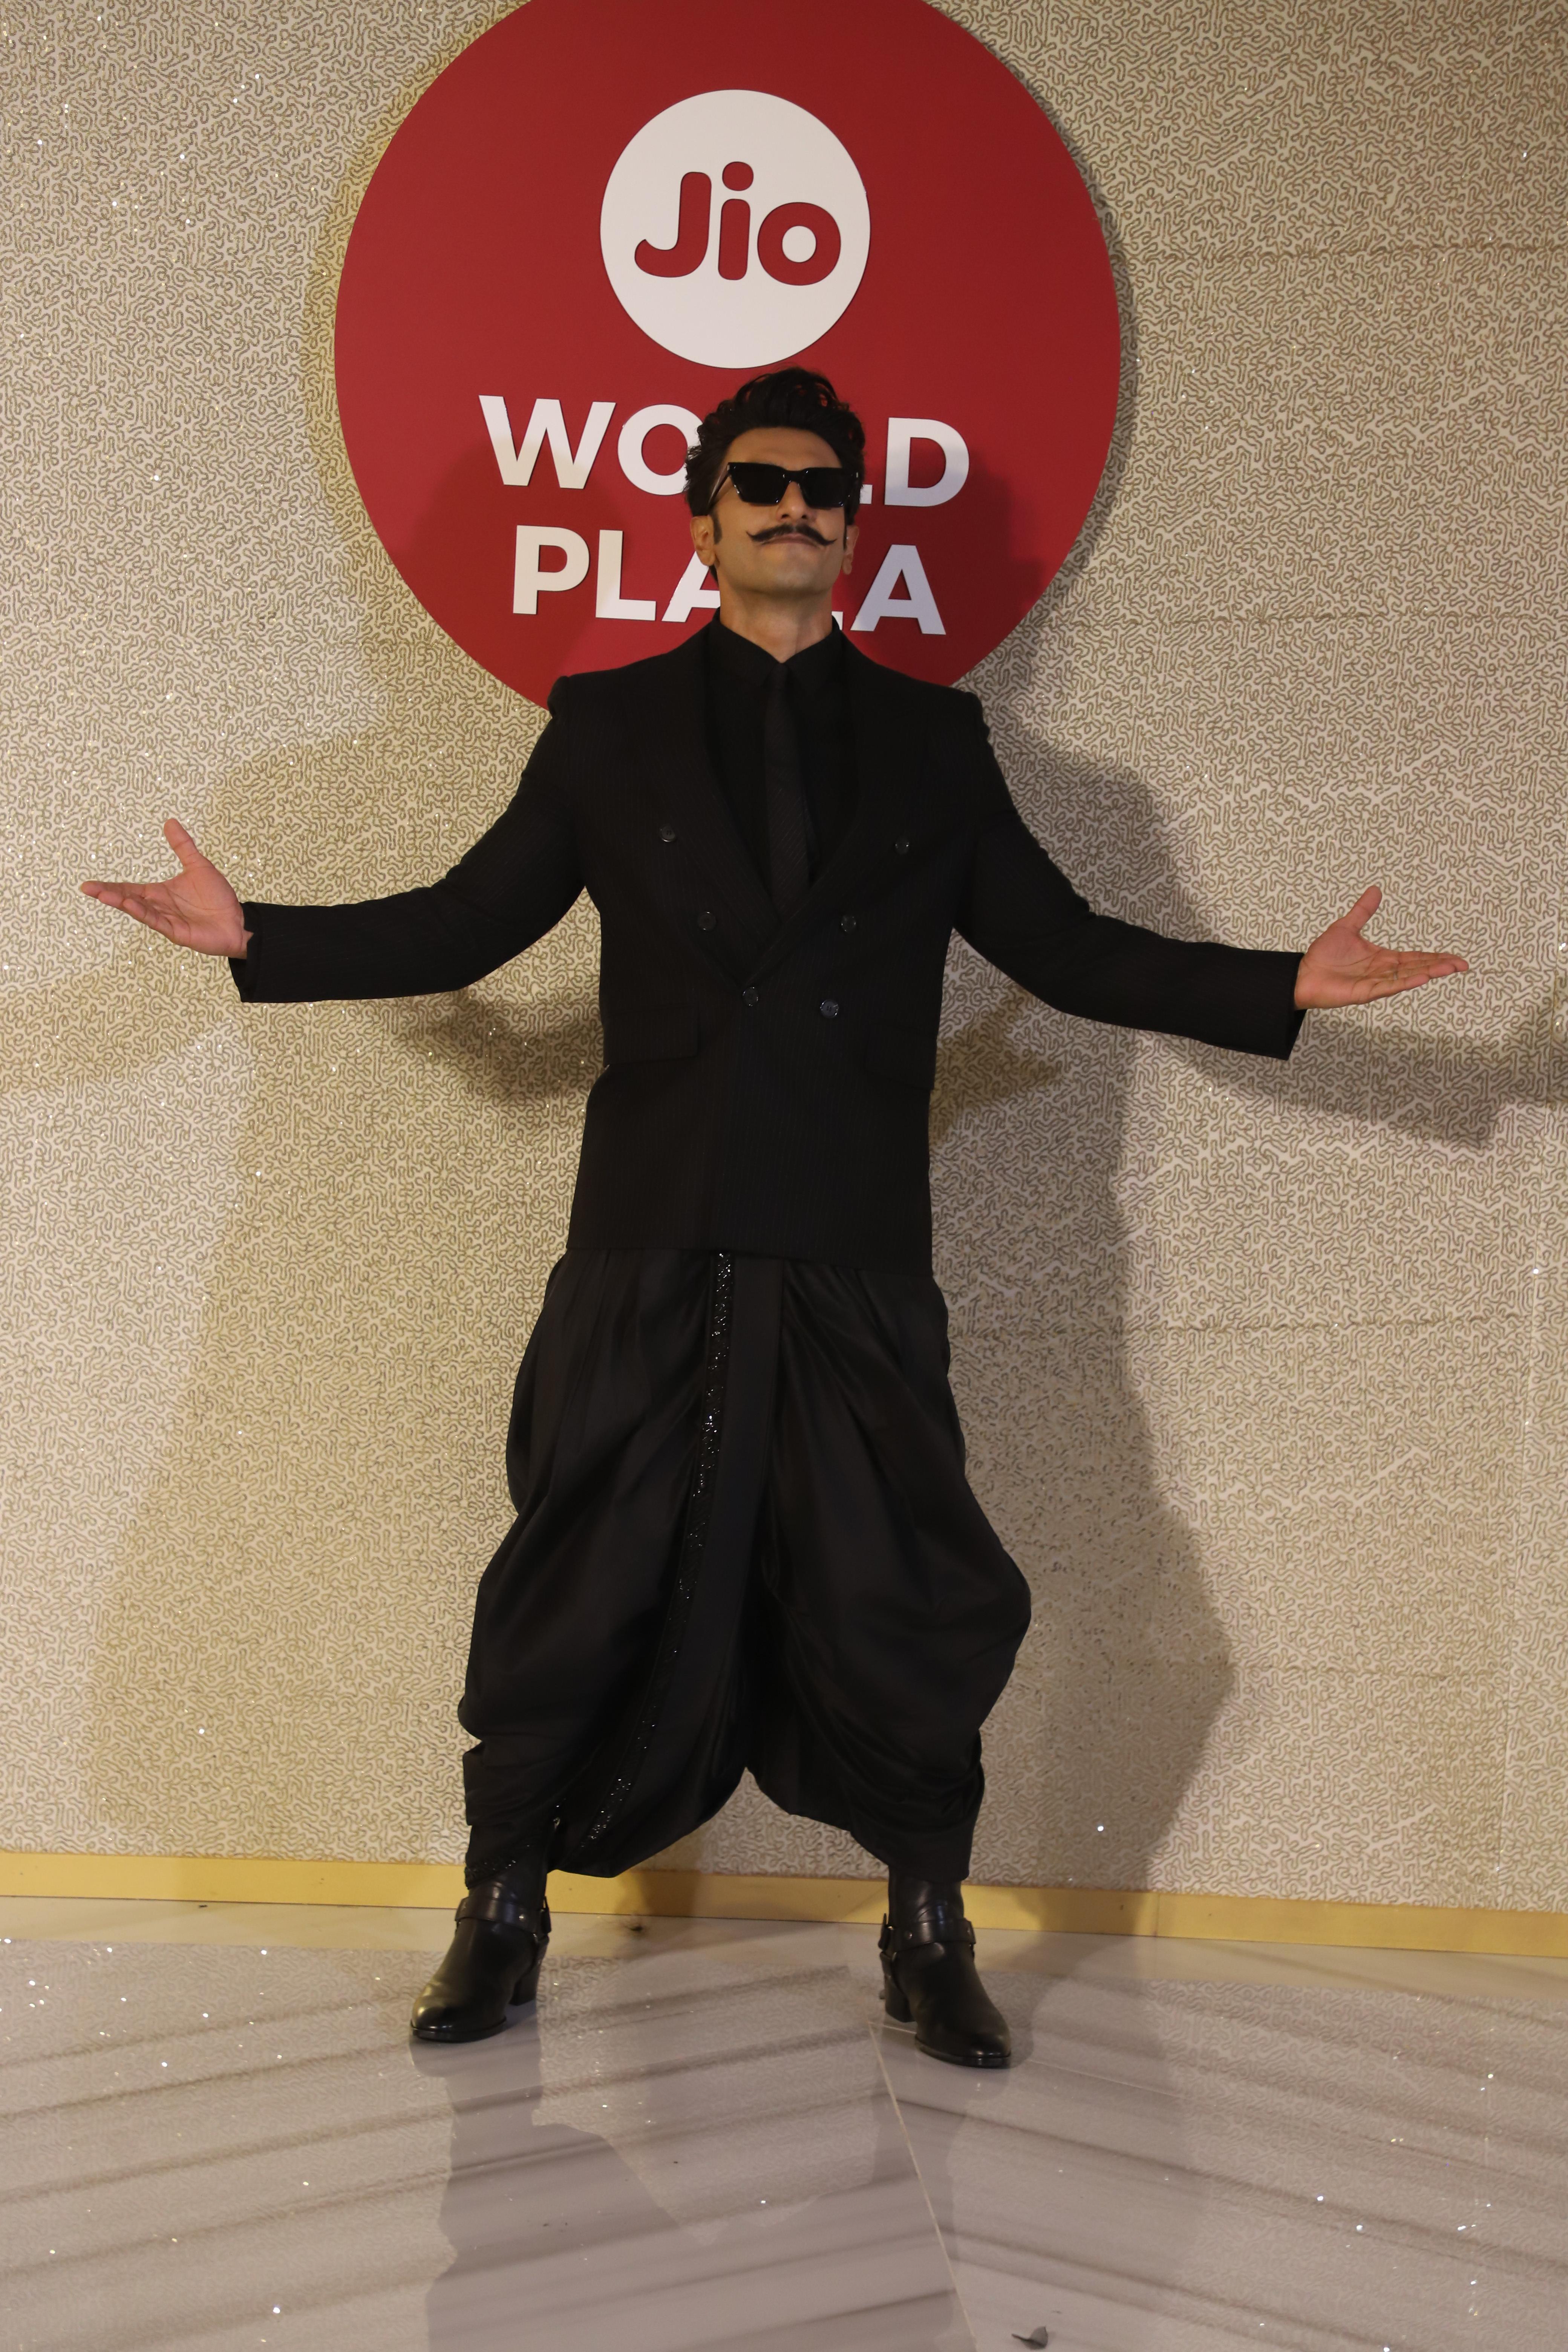 The actor wore a suit top which he paired with black dhoti pants. The actor complemented his outfit with black sunnies